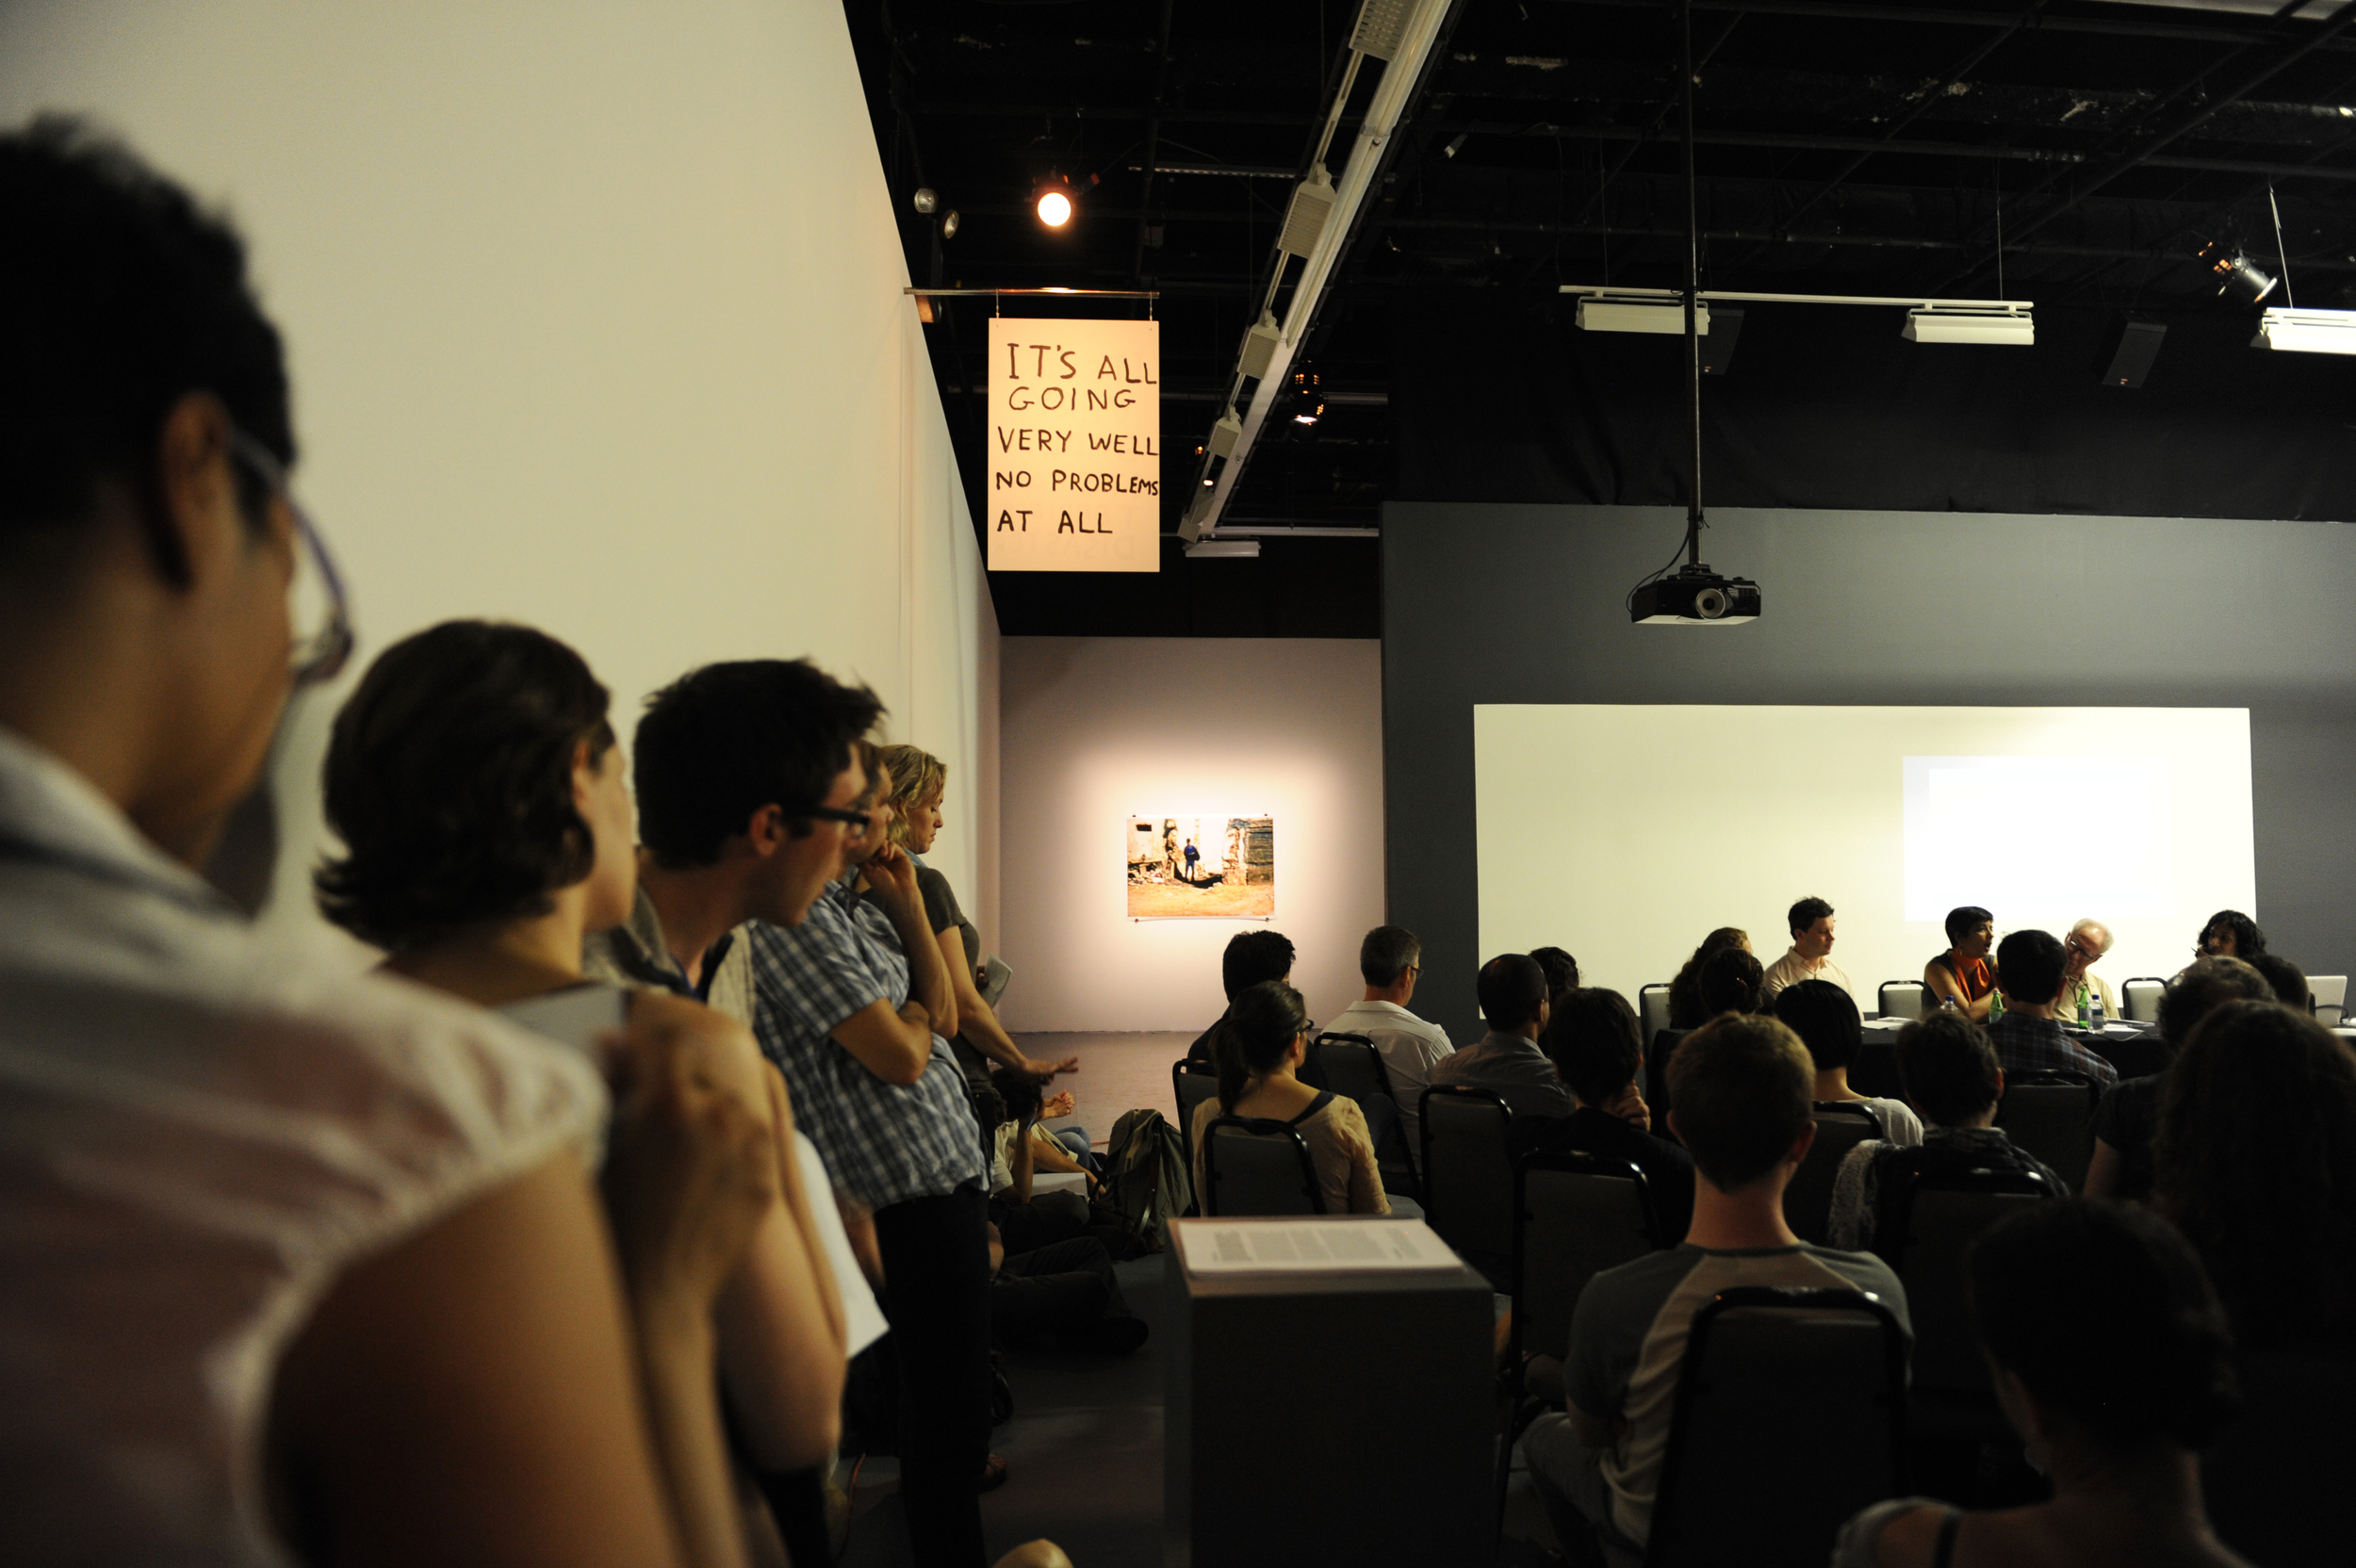  "City As Stage," Public Platform of the exhibition  Foreclosed. Bewteen Crisis and Possibility  (2011)&nbsp;at The Kitchen, New York City.&nbsp;Photograph by  Maria Domenica Rapicavoli.  